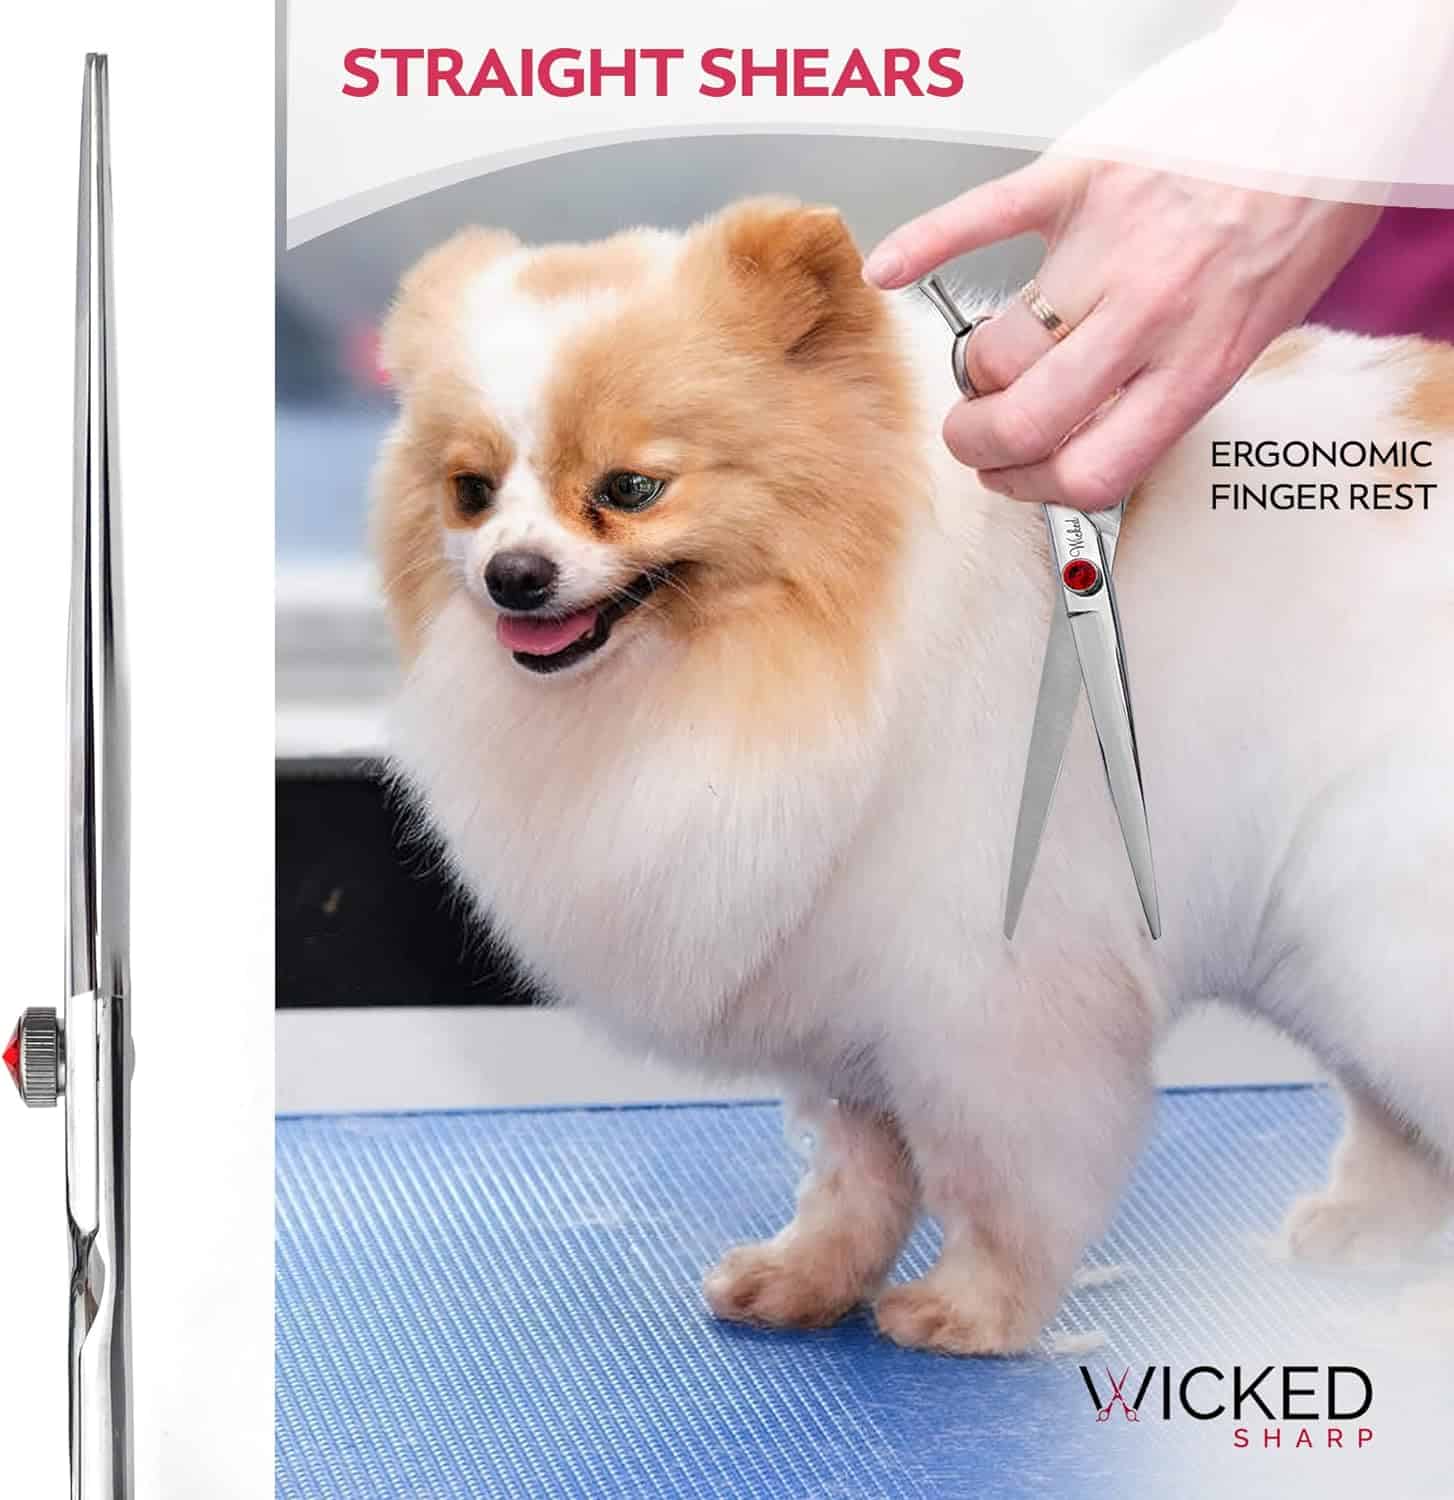 Wicked Sharp Professional Dog Scissors for Grooming - Achieve Perfect Cuts Every Time